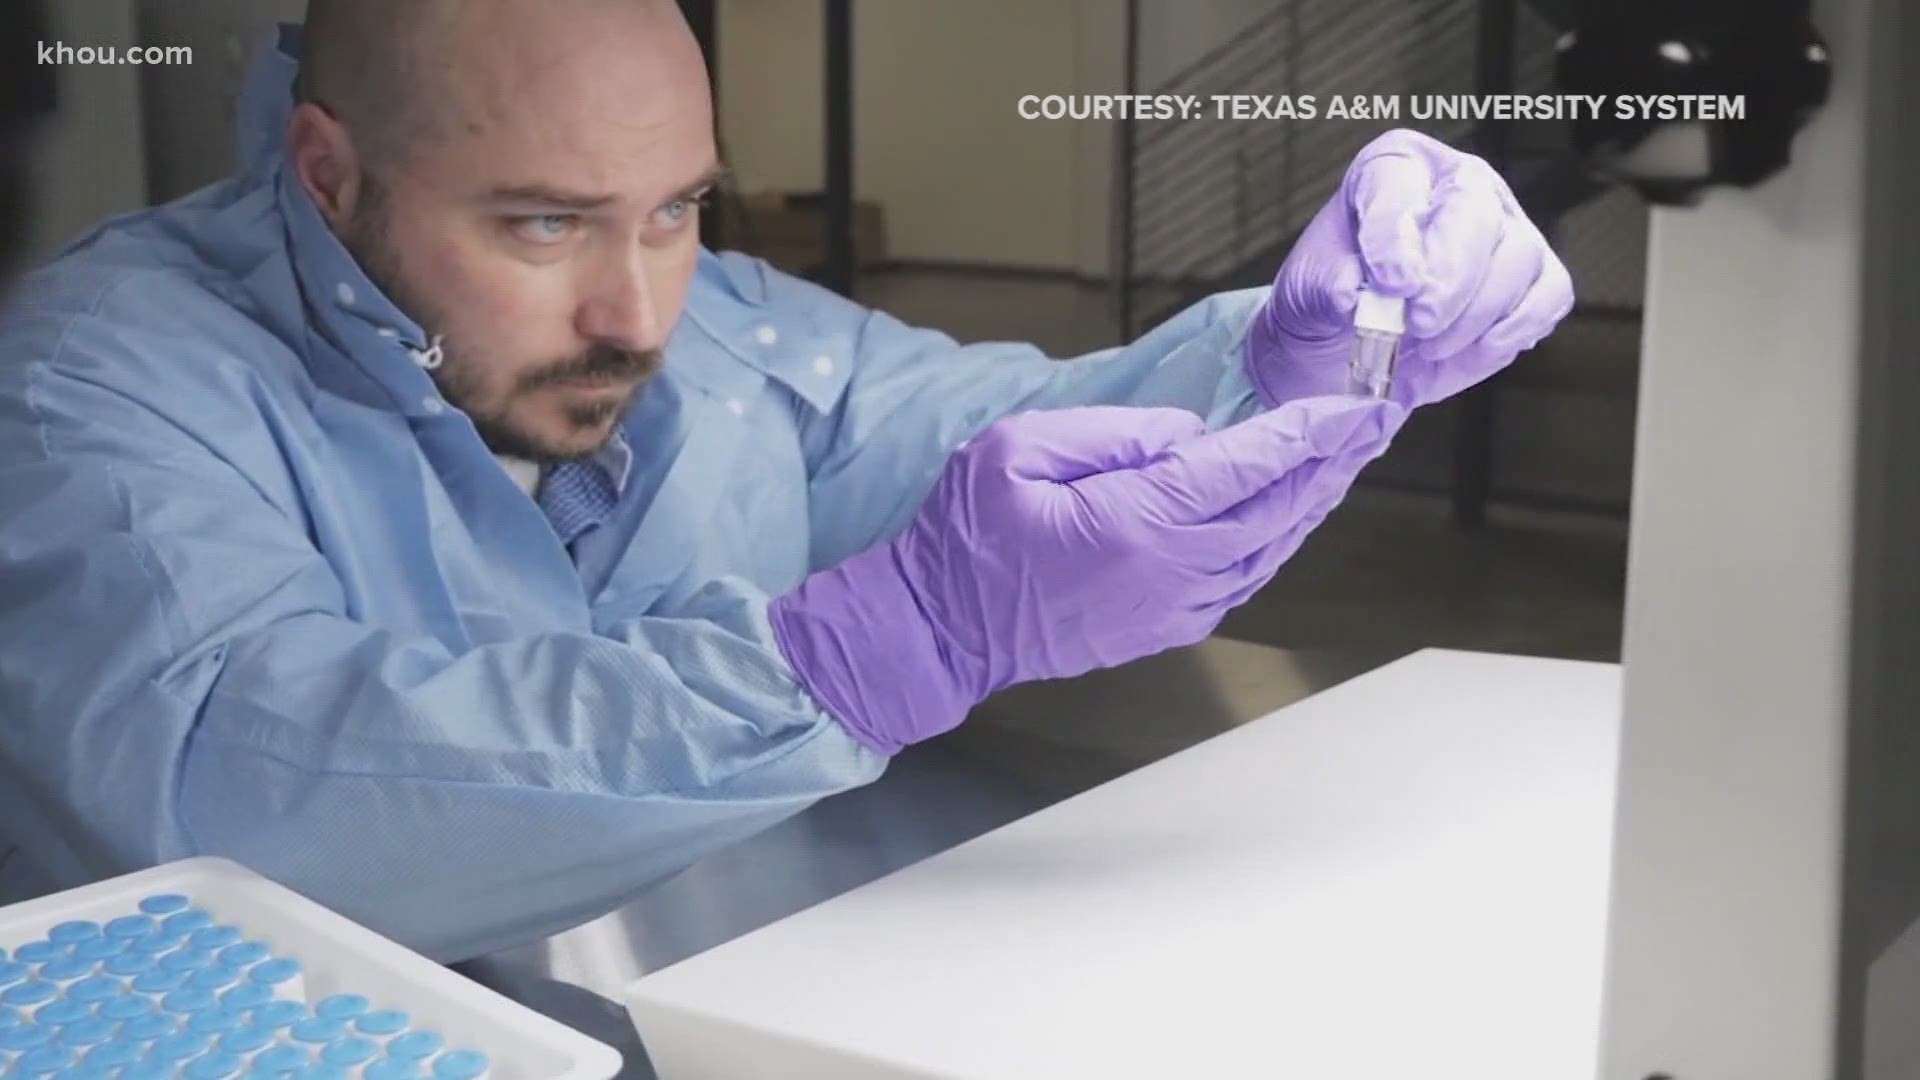 A bio-manufacturing center at Texas A&M University in College Station has been tapped to mass produce a COVID-19 vaccine, as soon as one is approved.